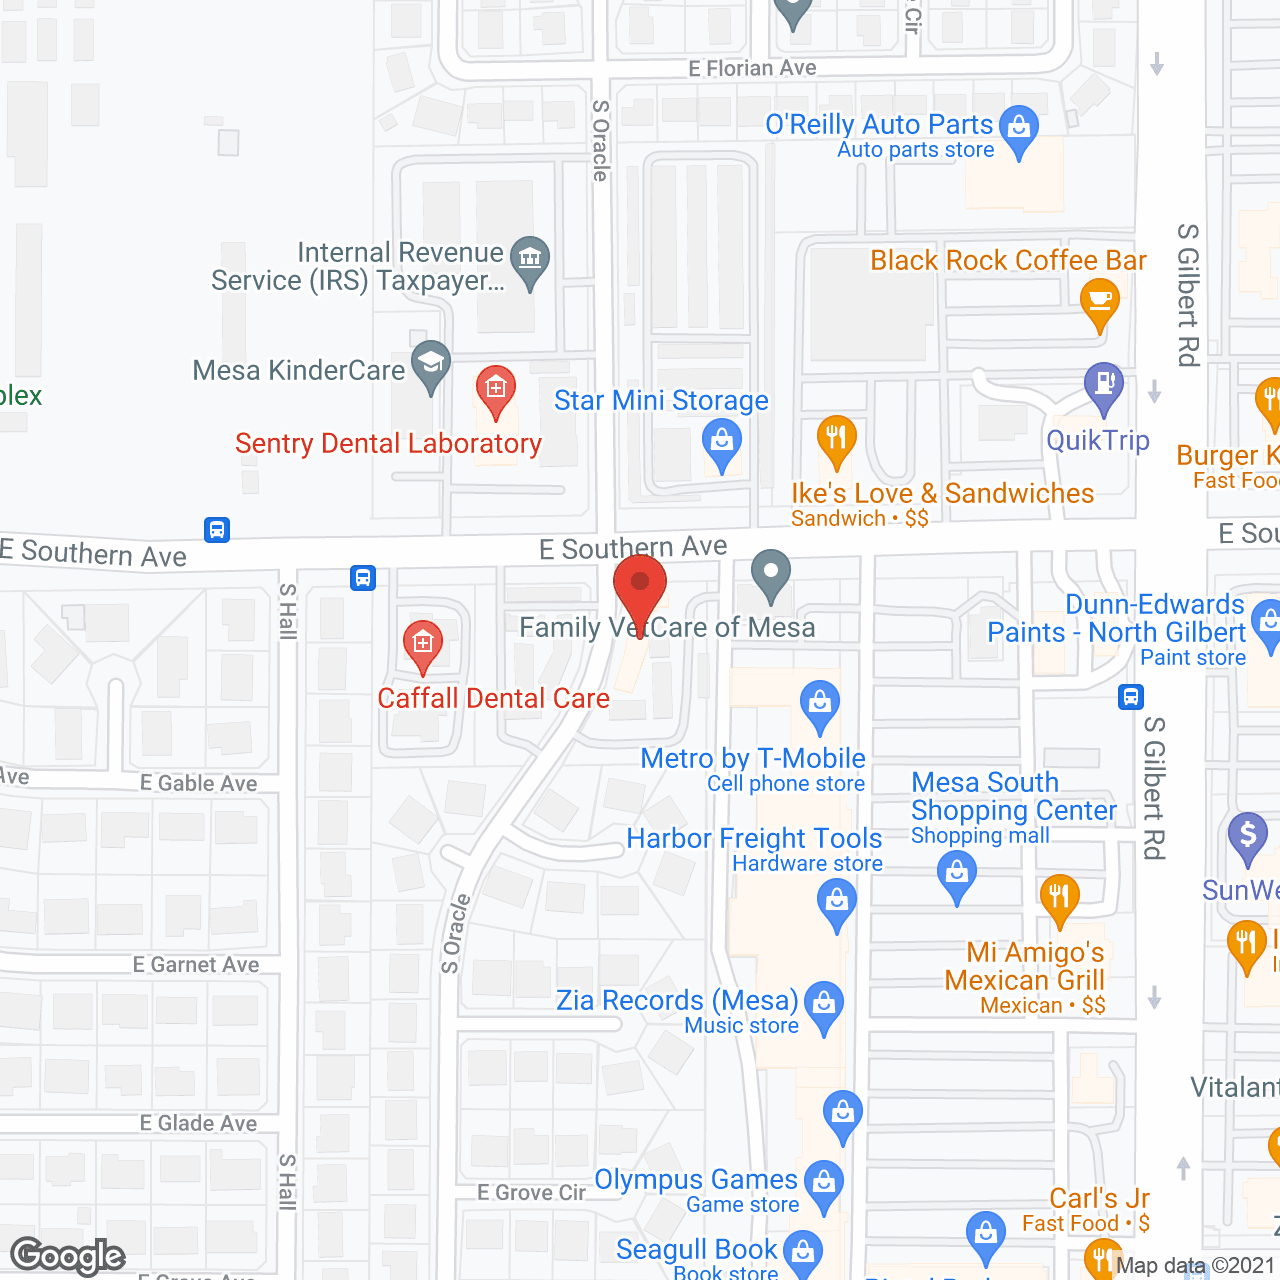 HomeWell Care Services of Mesa, AZ in google map